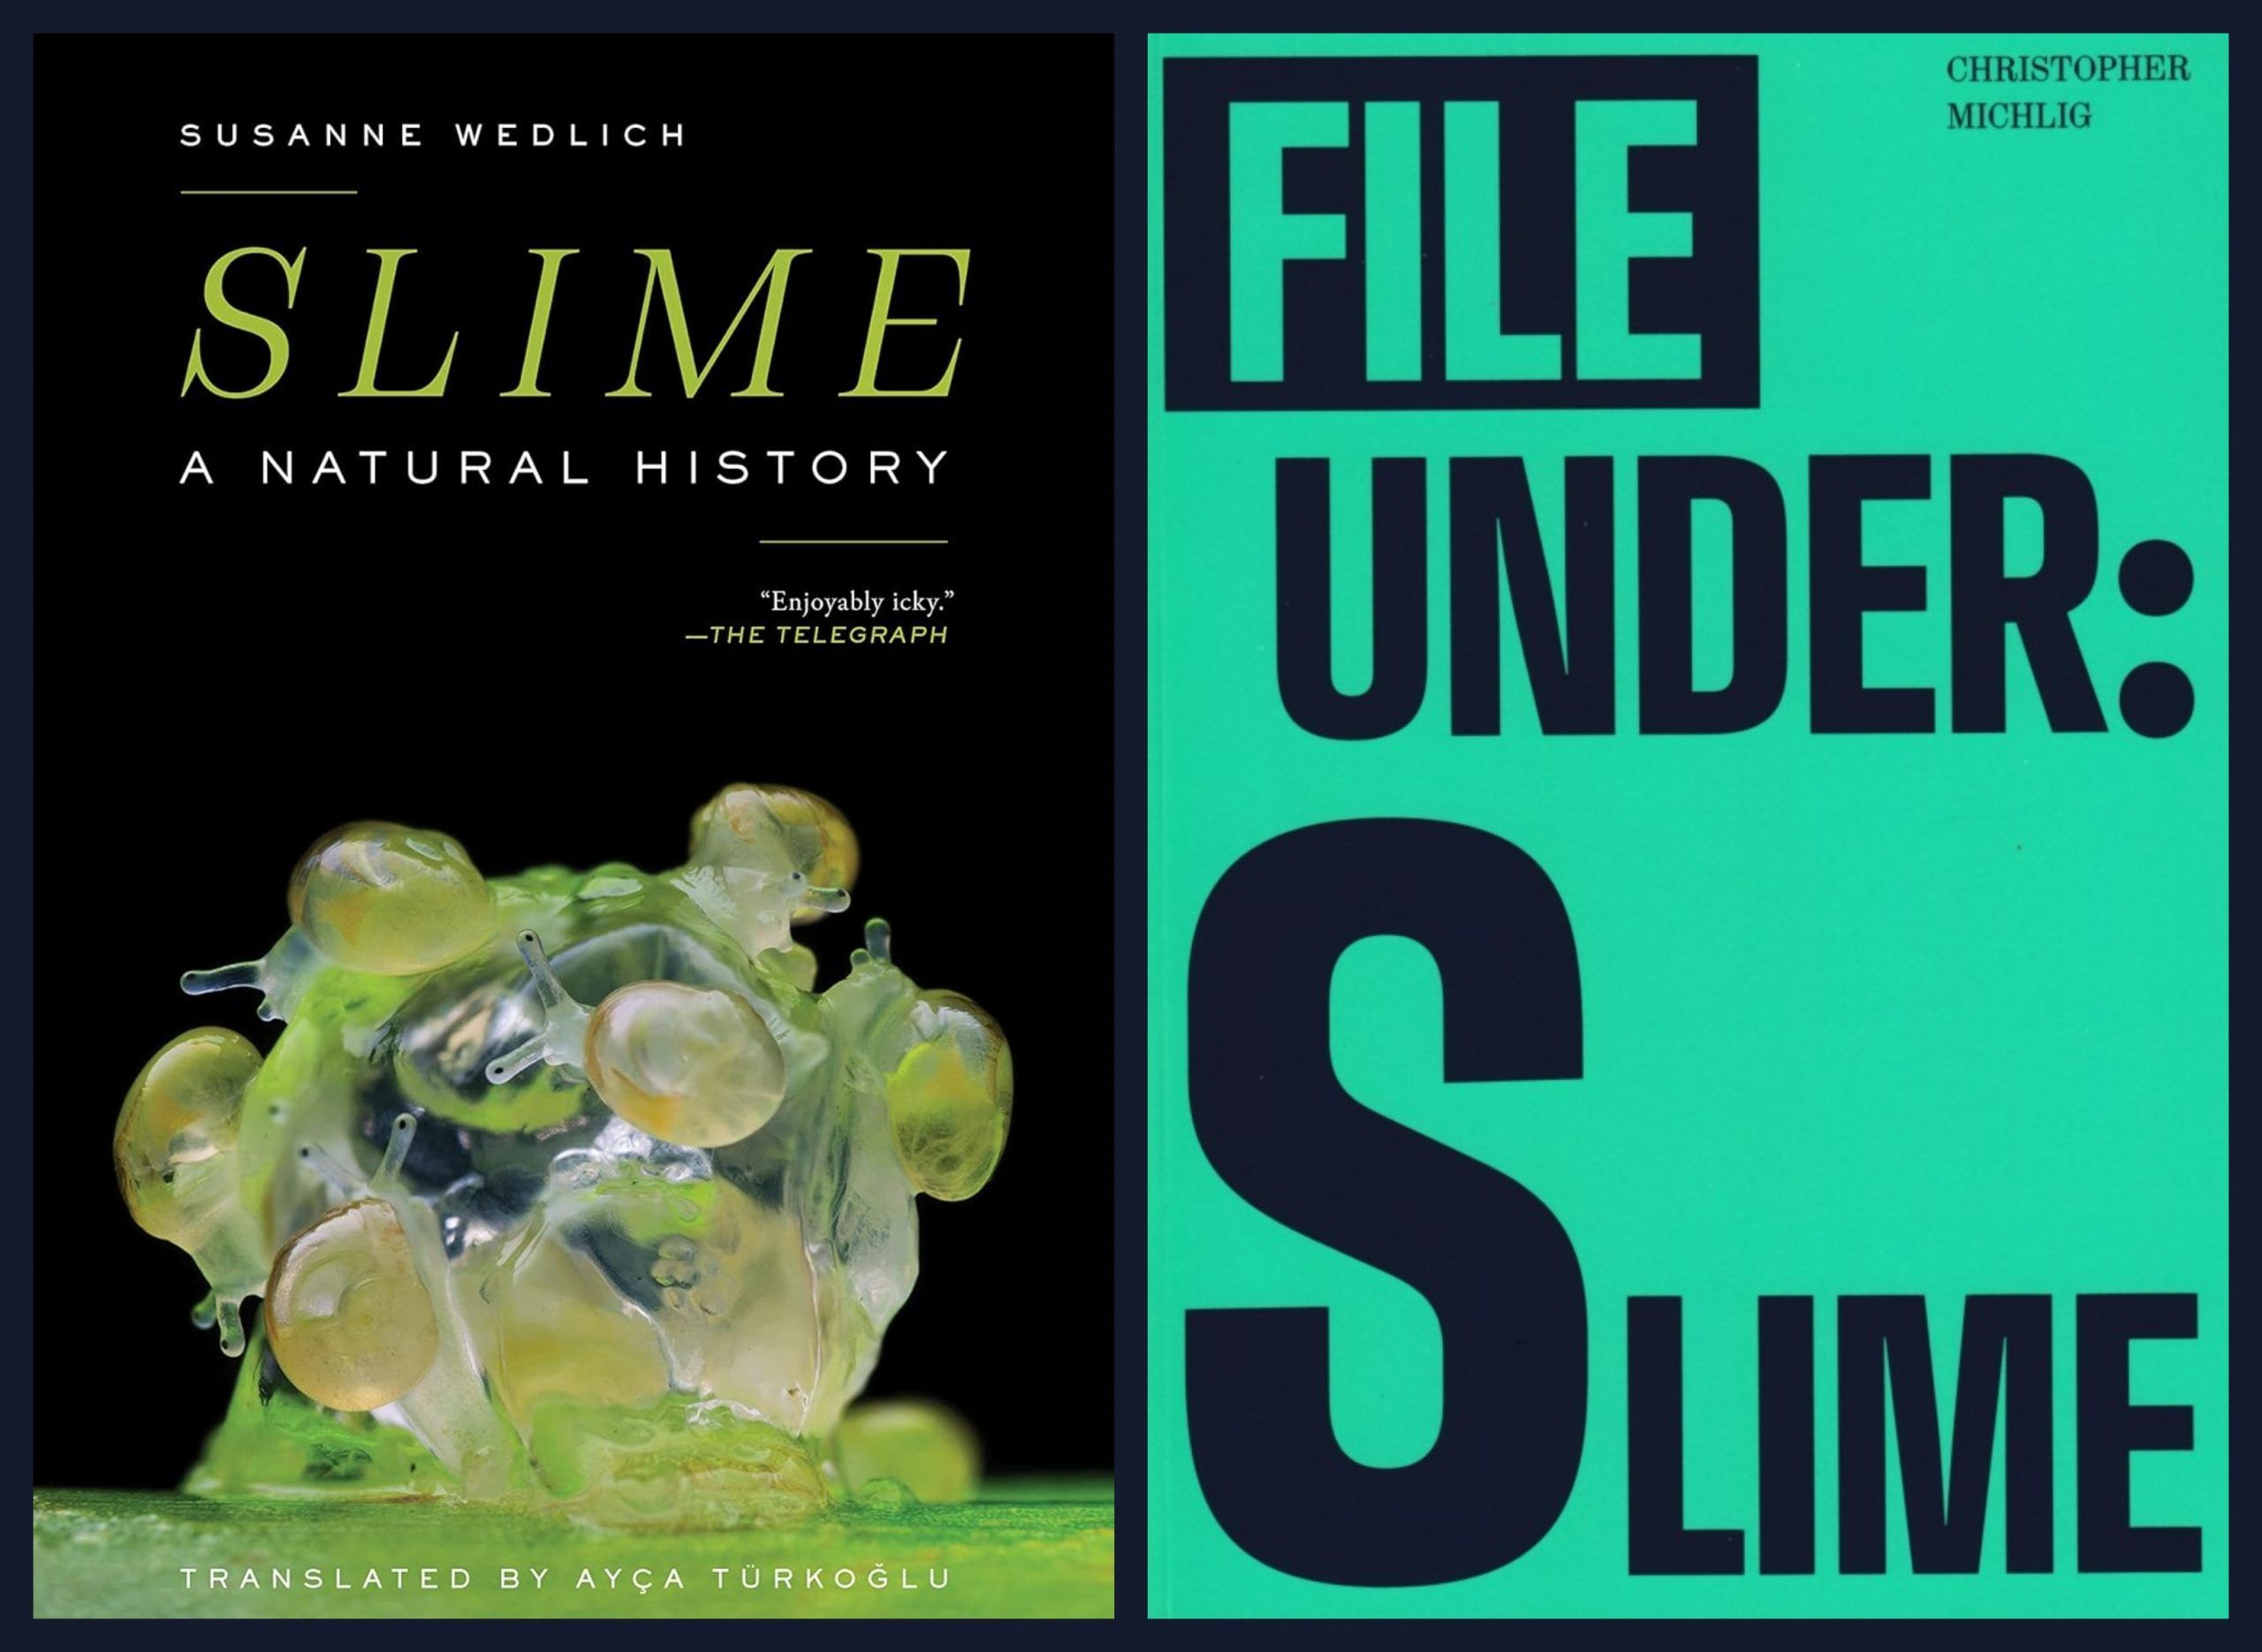 A People’s History of Slime: On Two New Books About Ooze